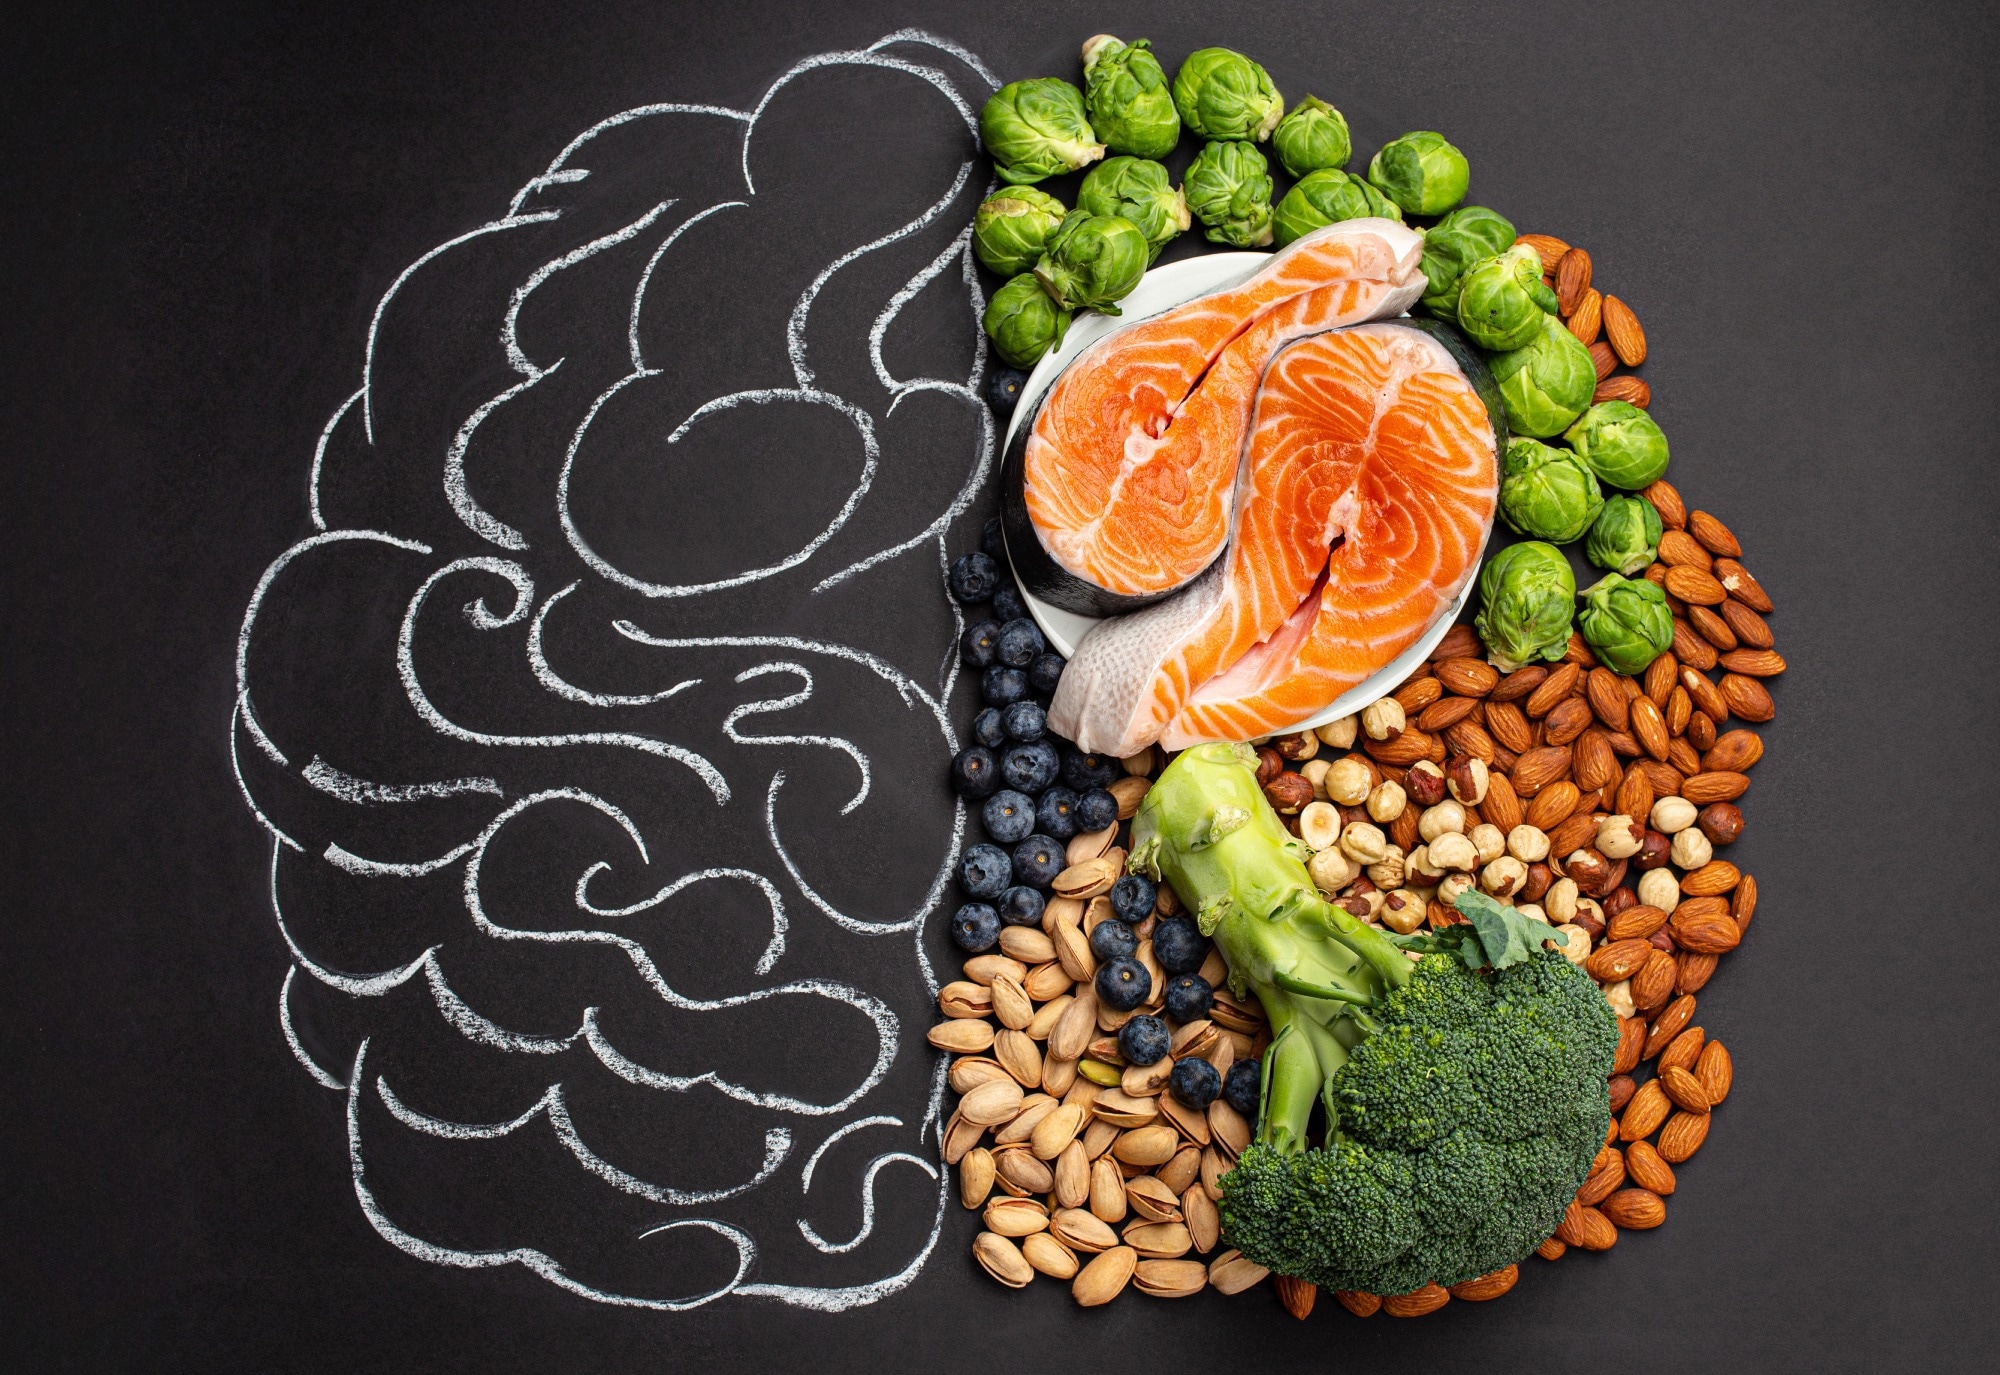 Study: Associations of dietary patterns with brain health from behavioral, neuroimaging, biochemical and genetic analyses.  Image credit: Elena Eremenko/Shutterstock